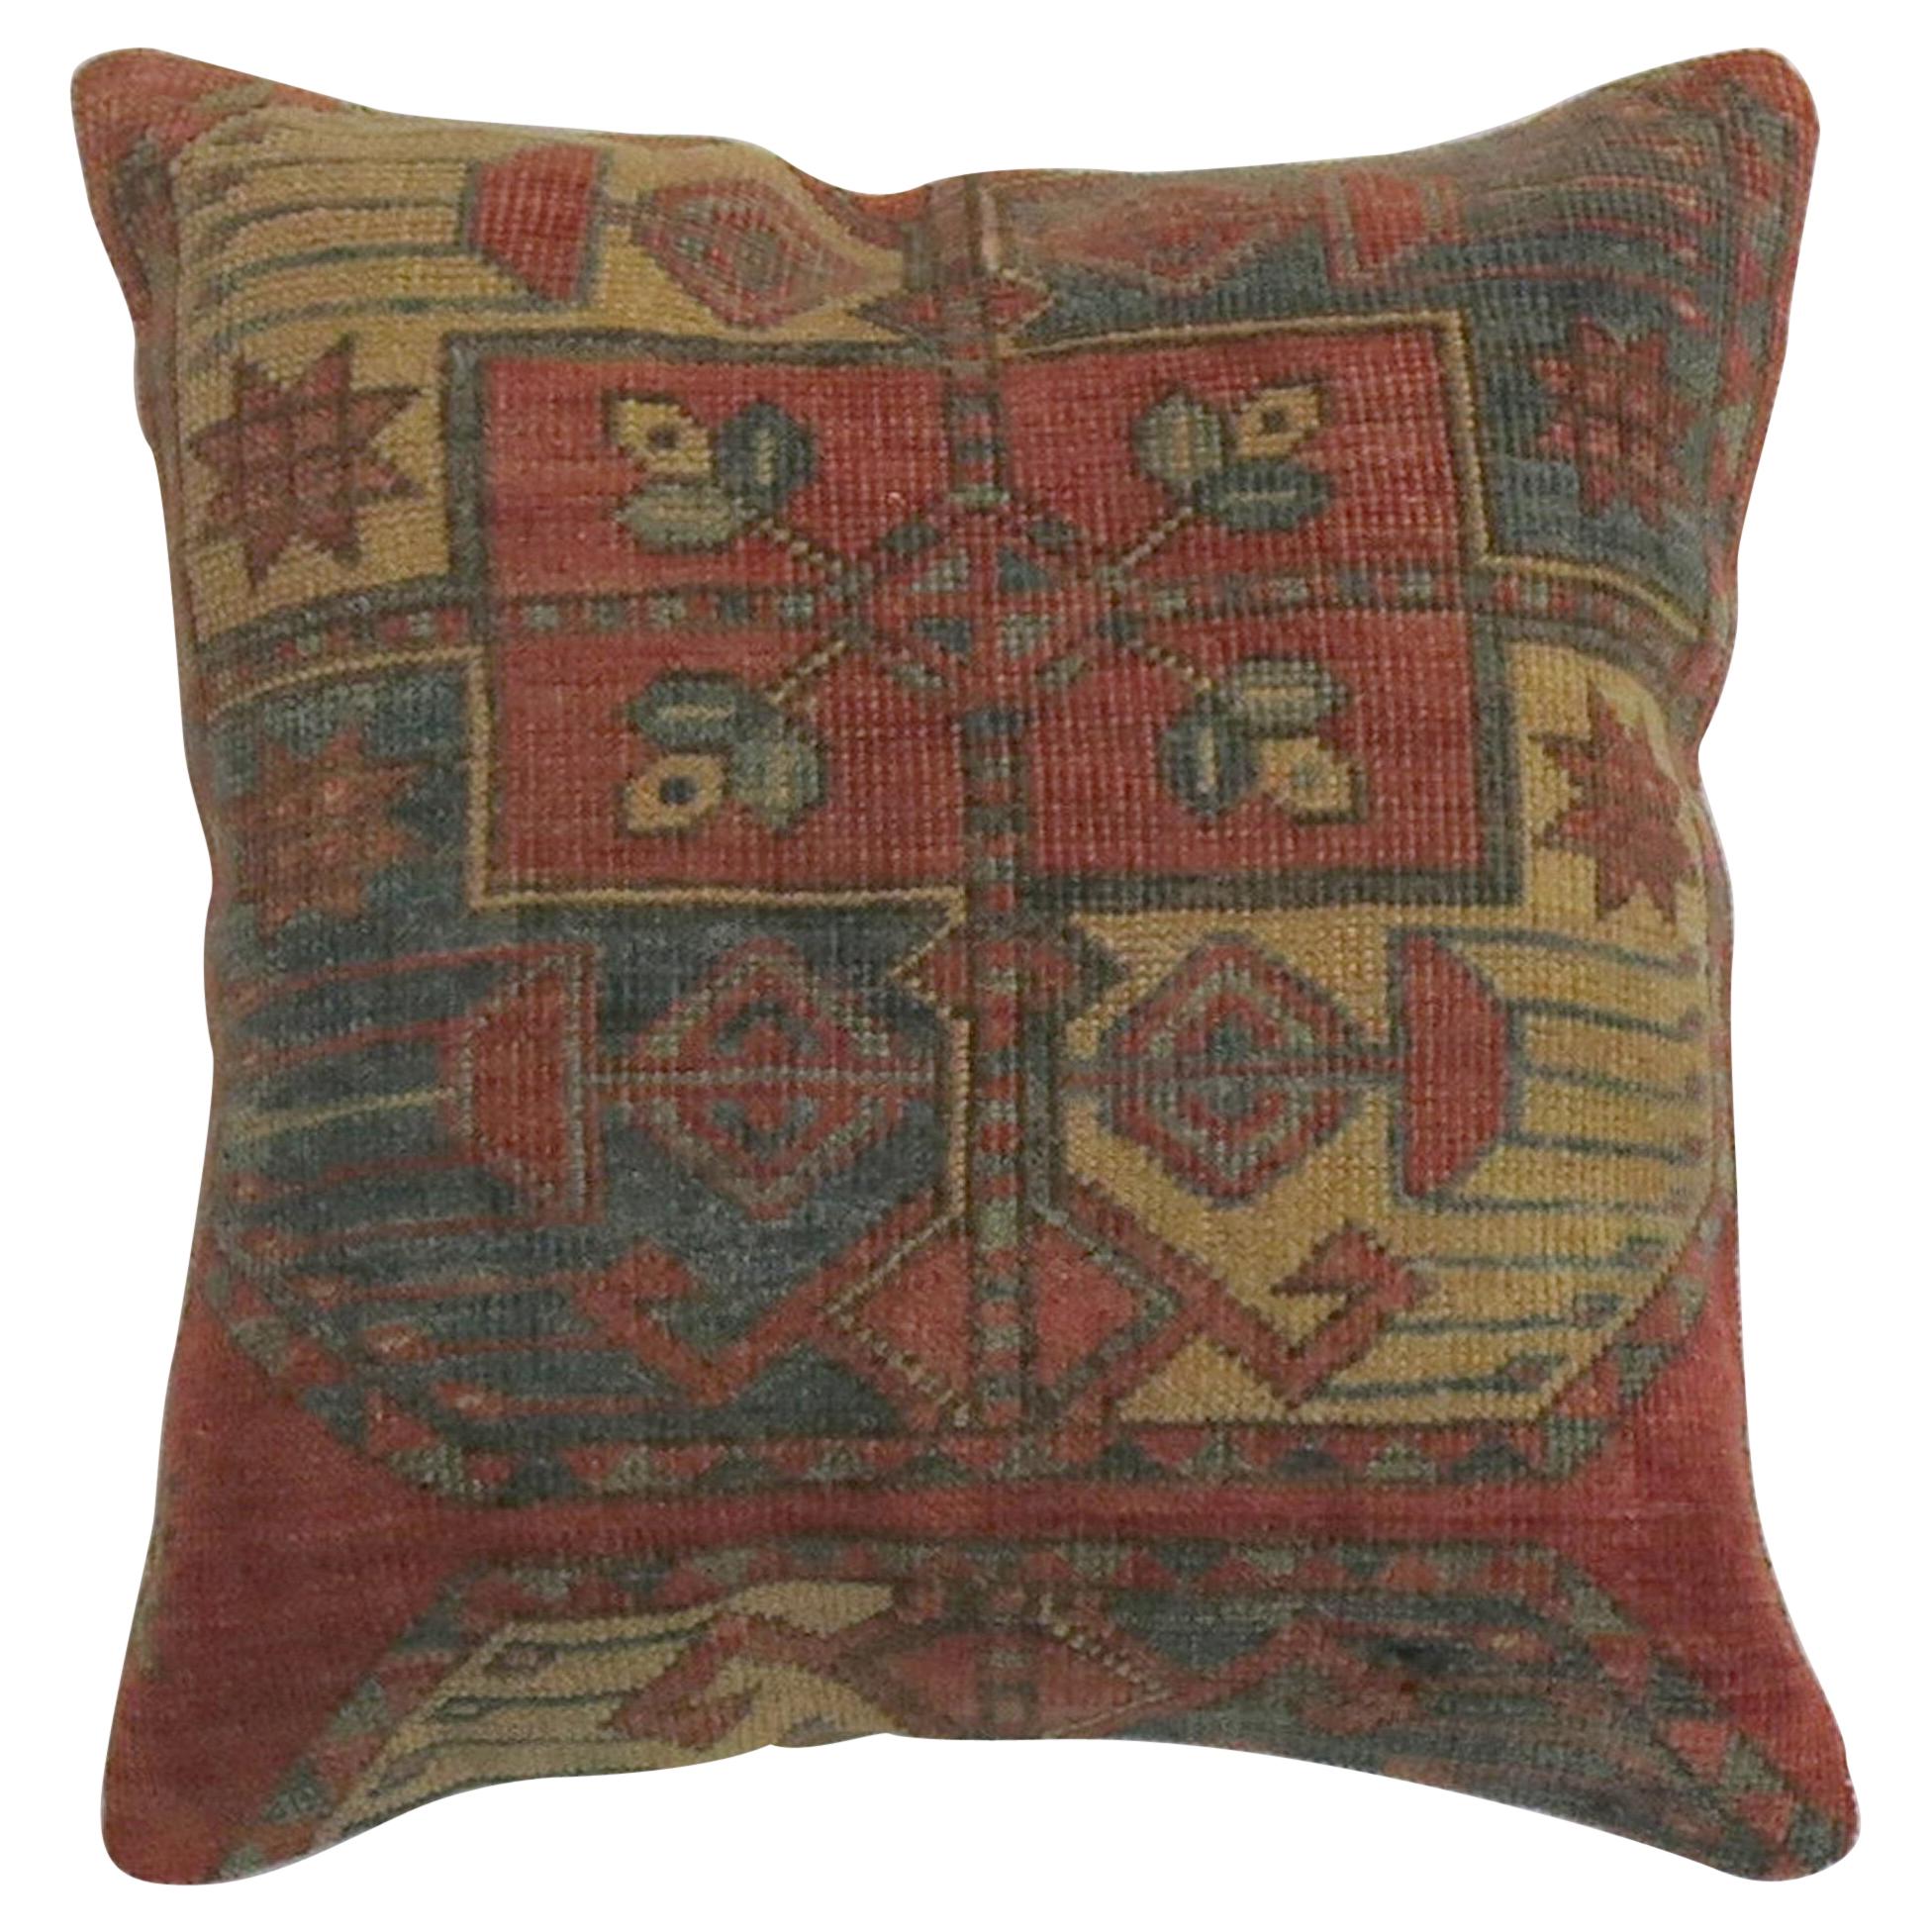 Rustic Tribal Afghan Antique Wool Square Rug Pillow